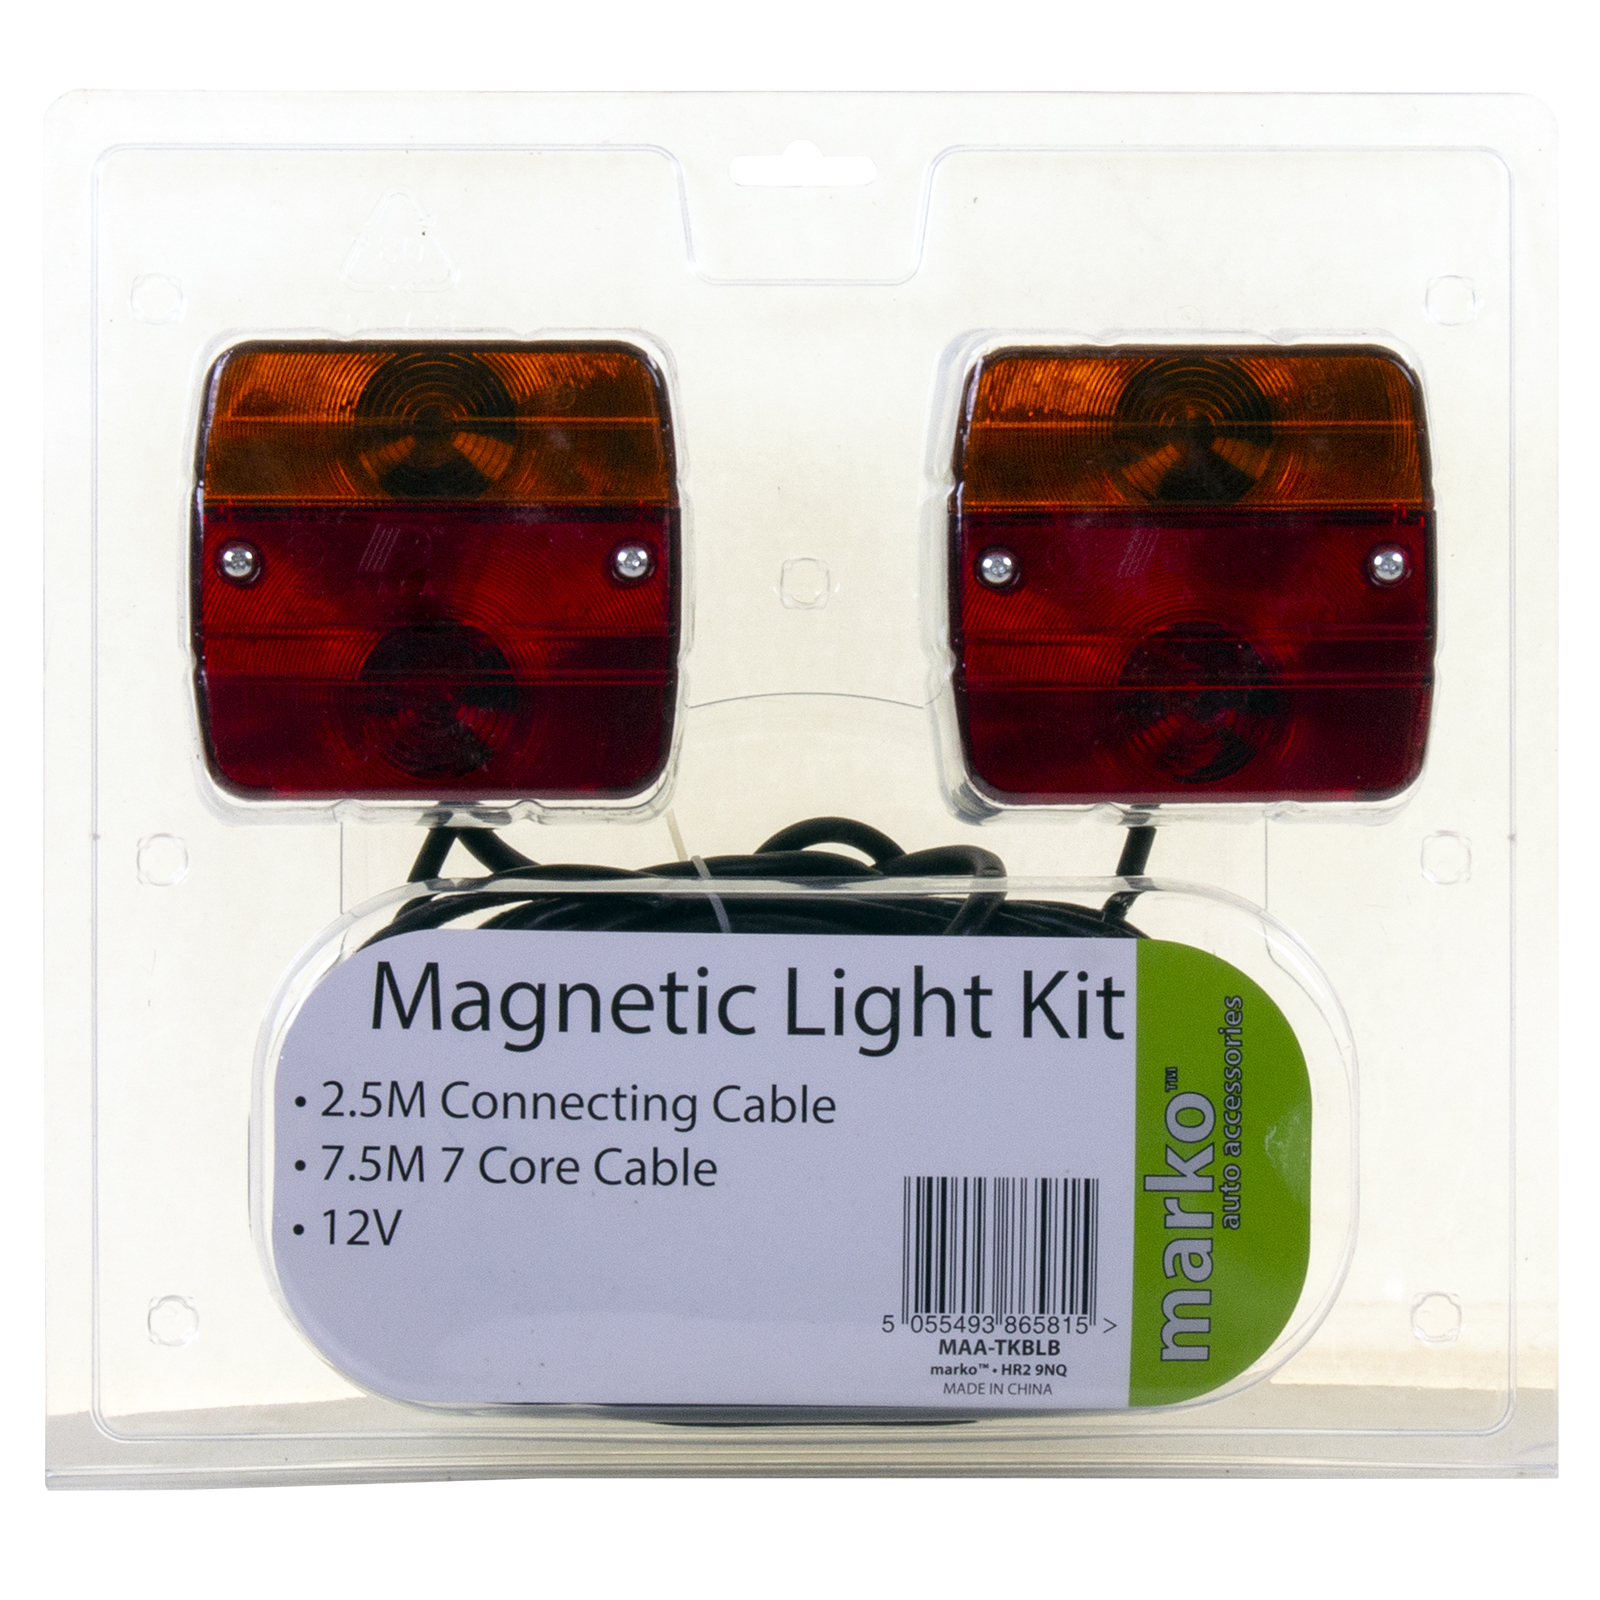 MAGNETIC TRAILER LIGHT KIT TOWING LIGHTING POD BOARD HALOGEN 7.5M 7 CORE CABLE